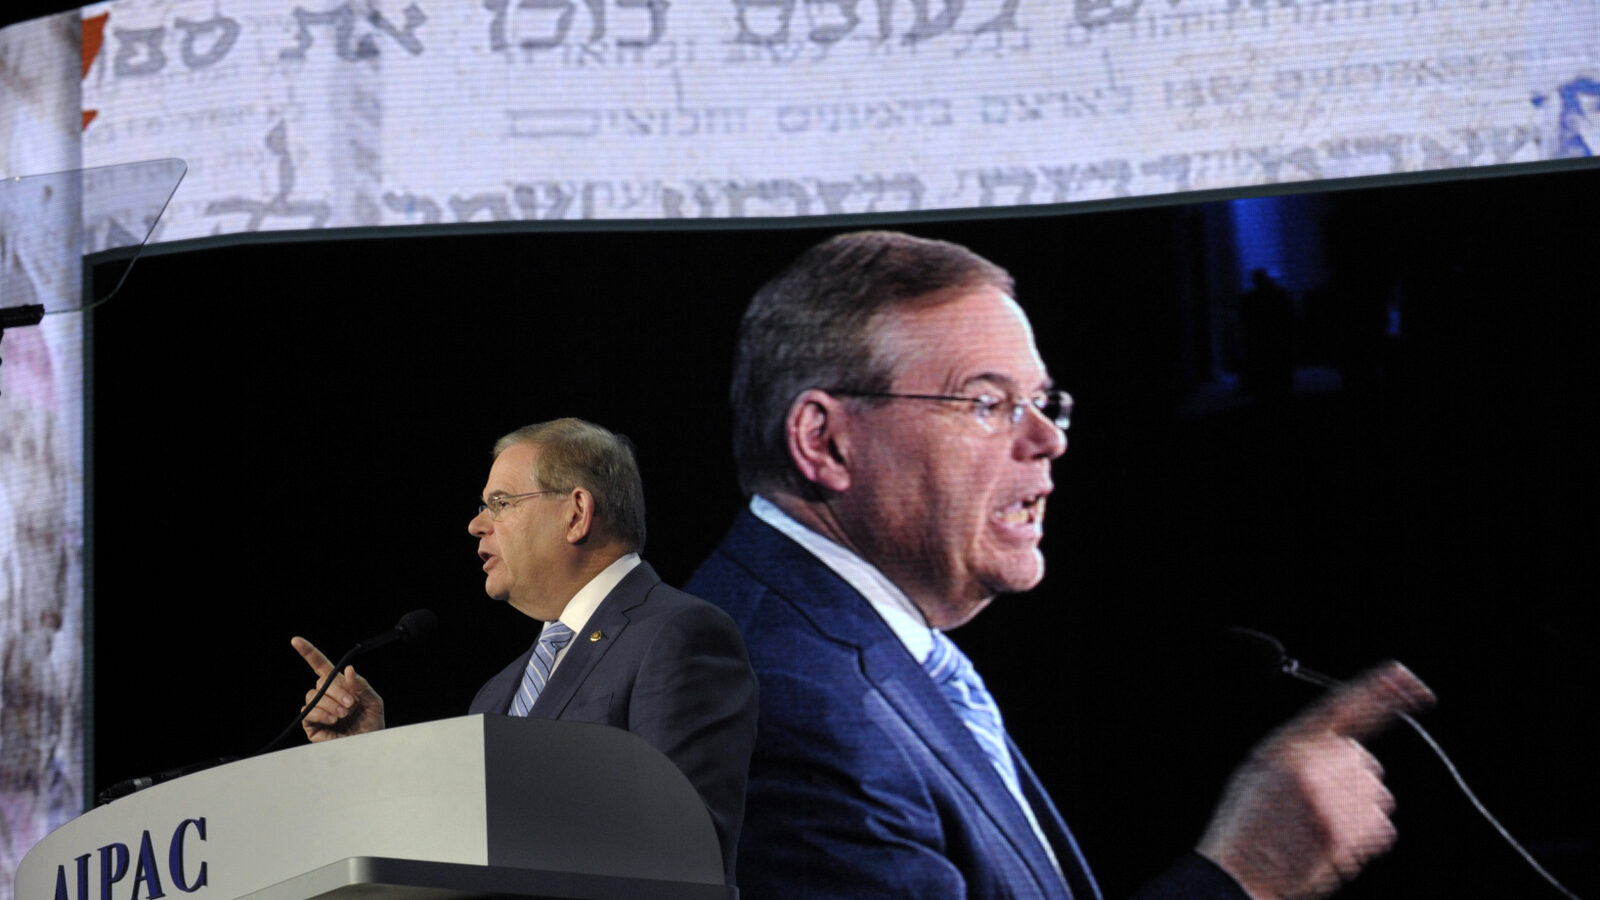 Senate Foreign Relations Committee Chairman Sen. Robert Menendez, D-N.J., addresses the American-Israeli Public Affairs Committee (AIPAC) 2013 Policy Conference. (AP/Susan Walsh)